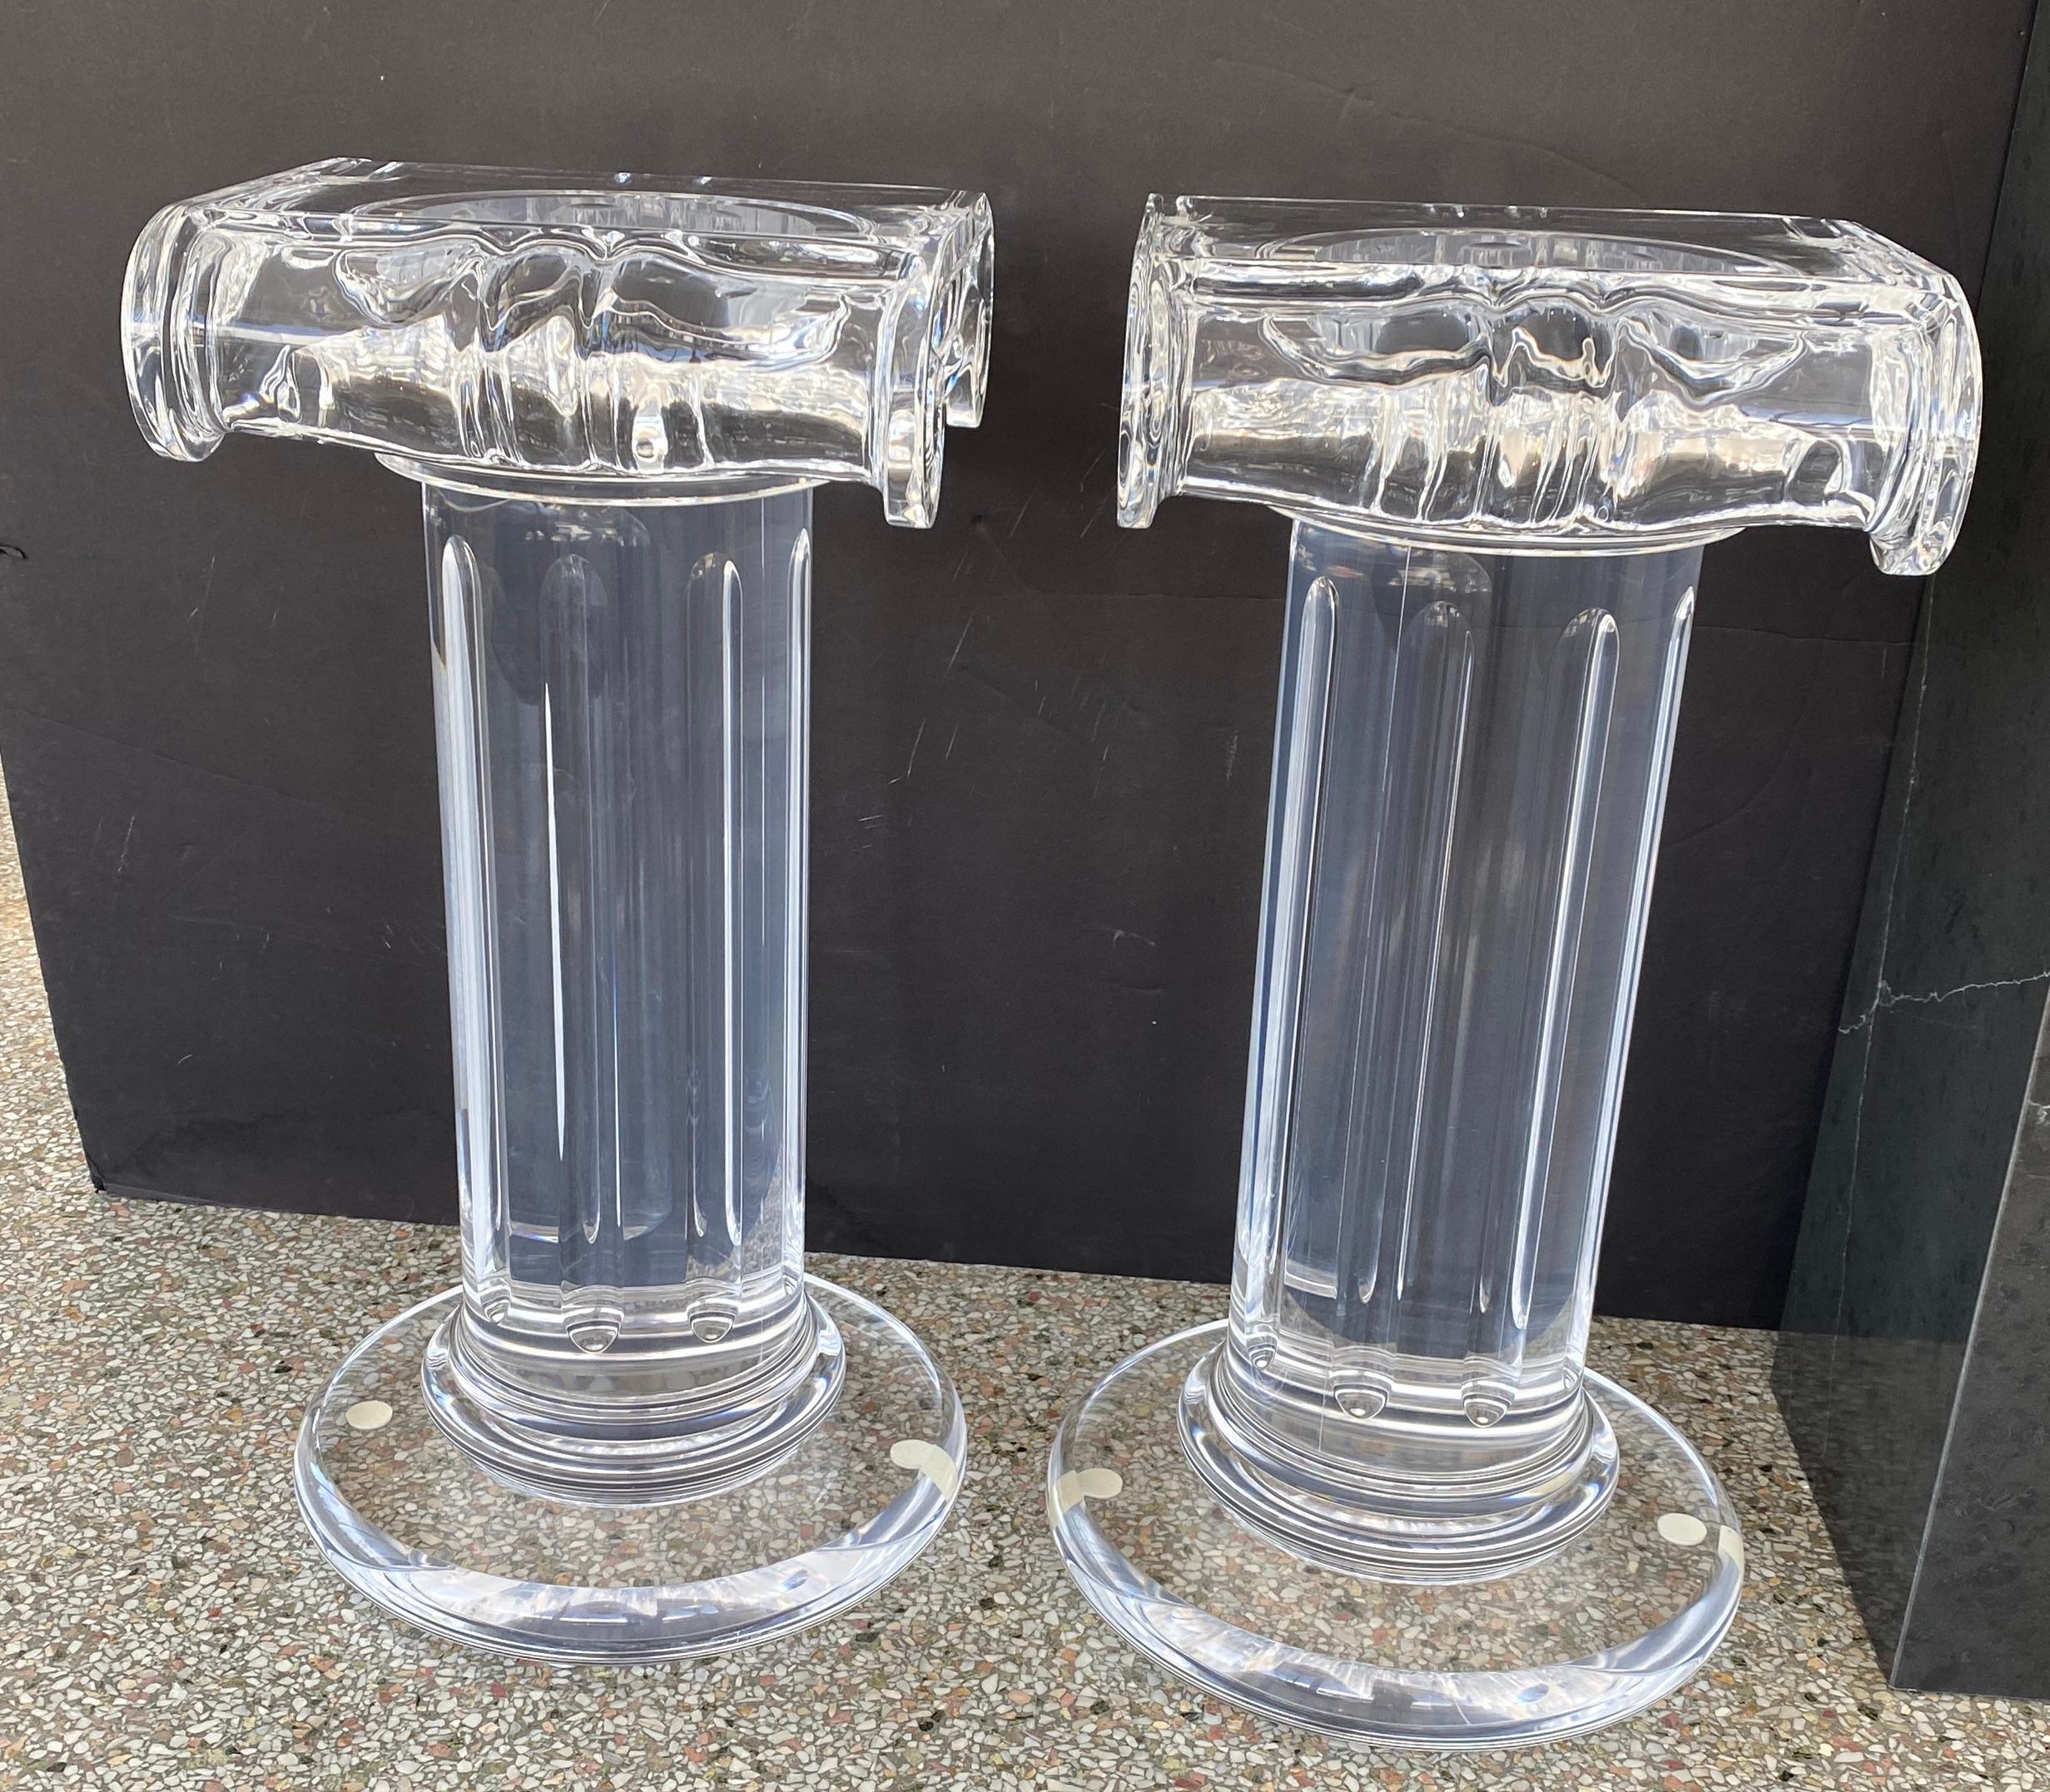 Neoclassical Revival Pair of Classical Style Lucite Pedestals For Sale